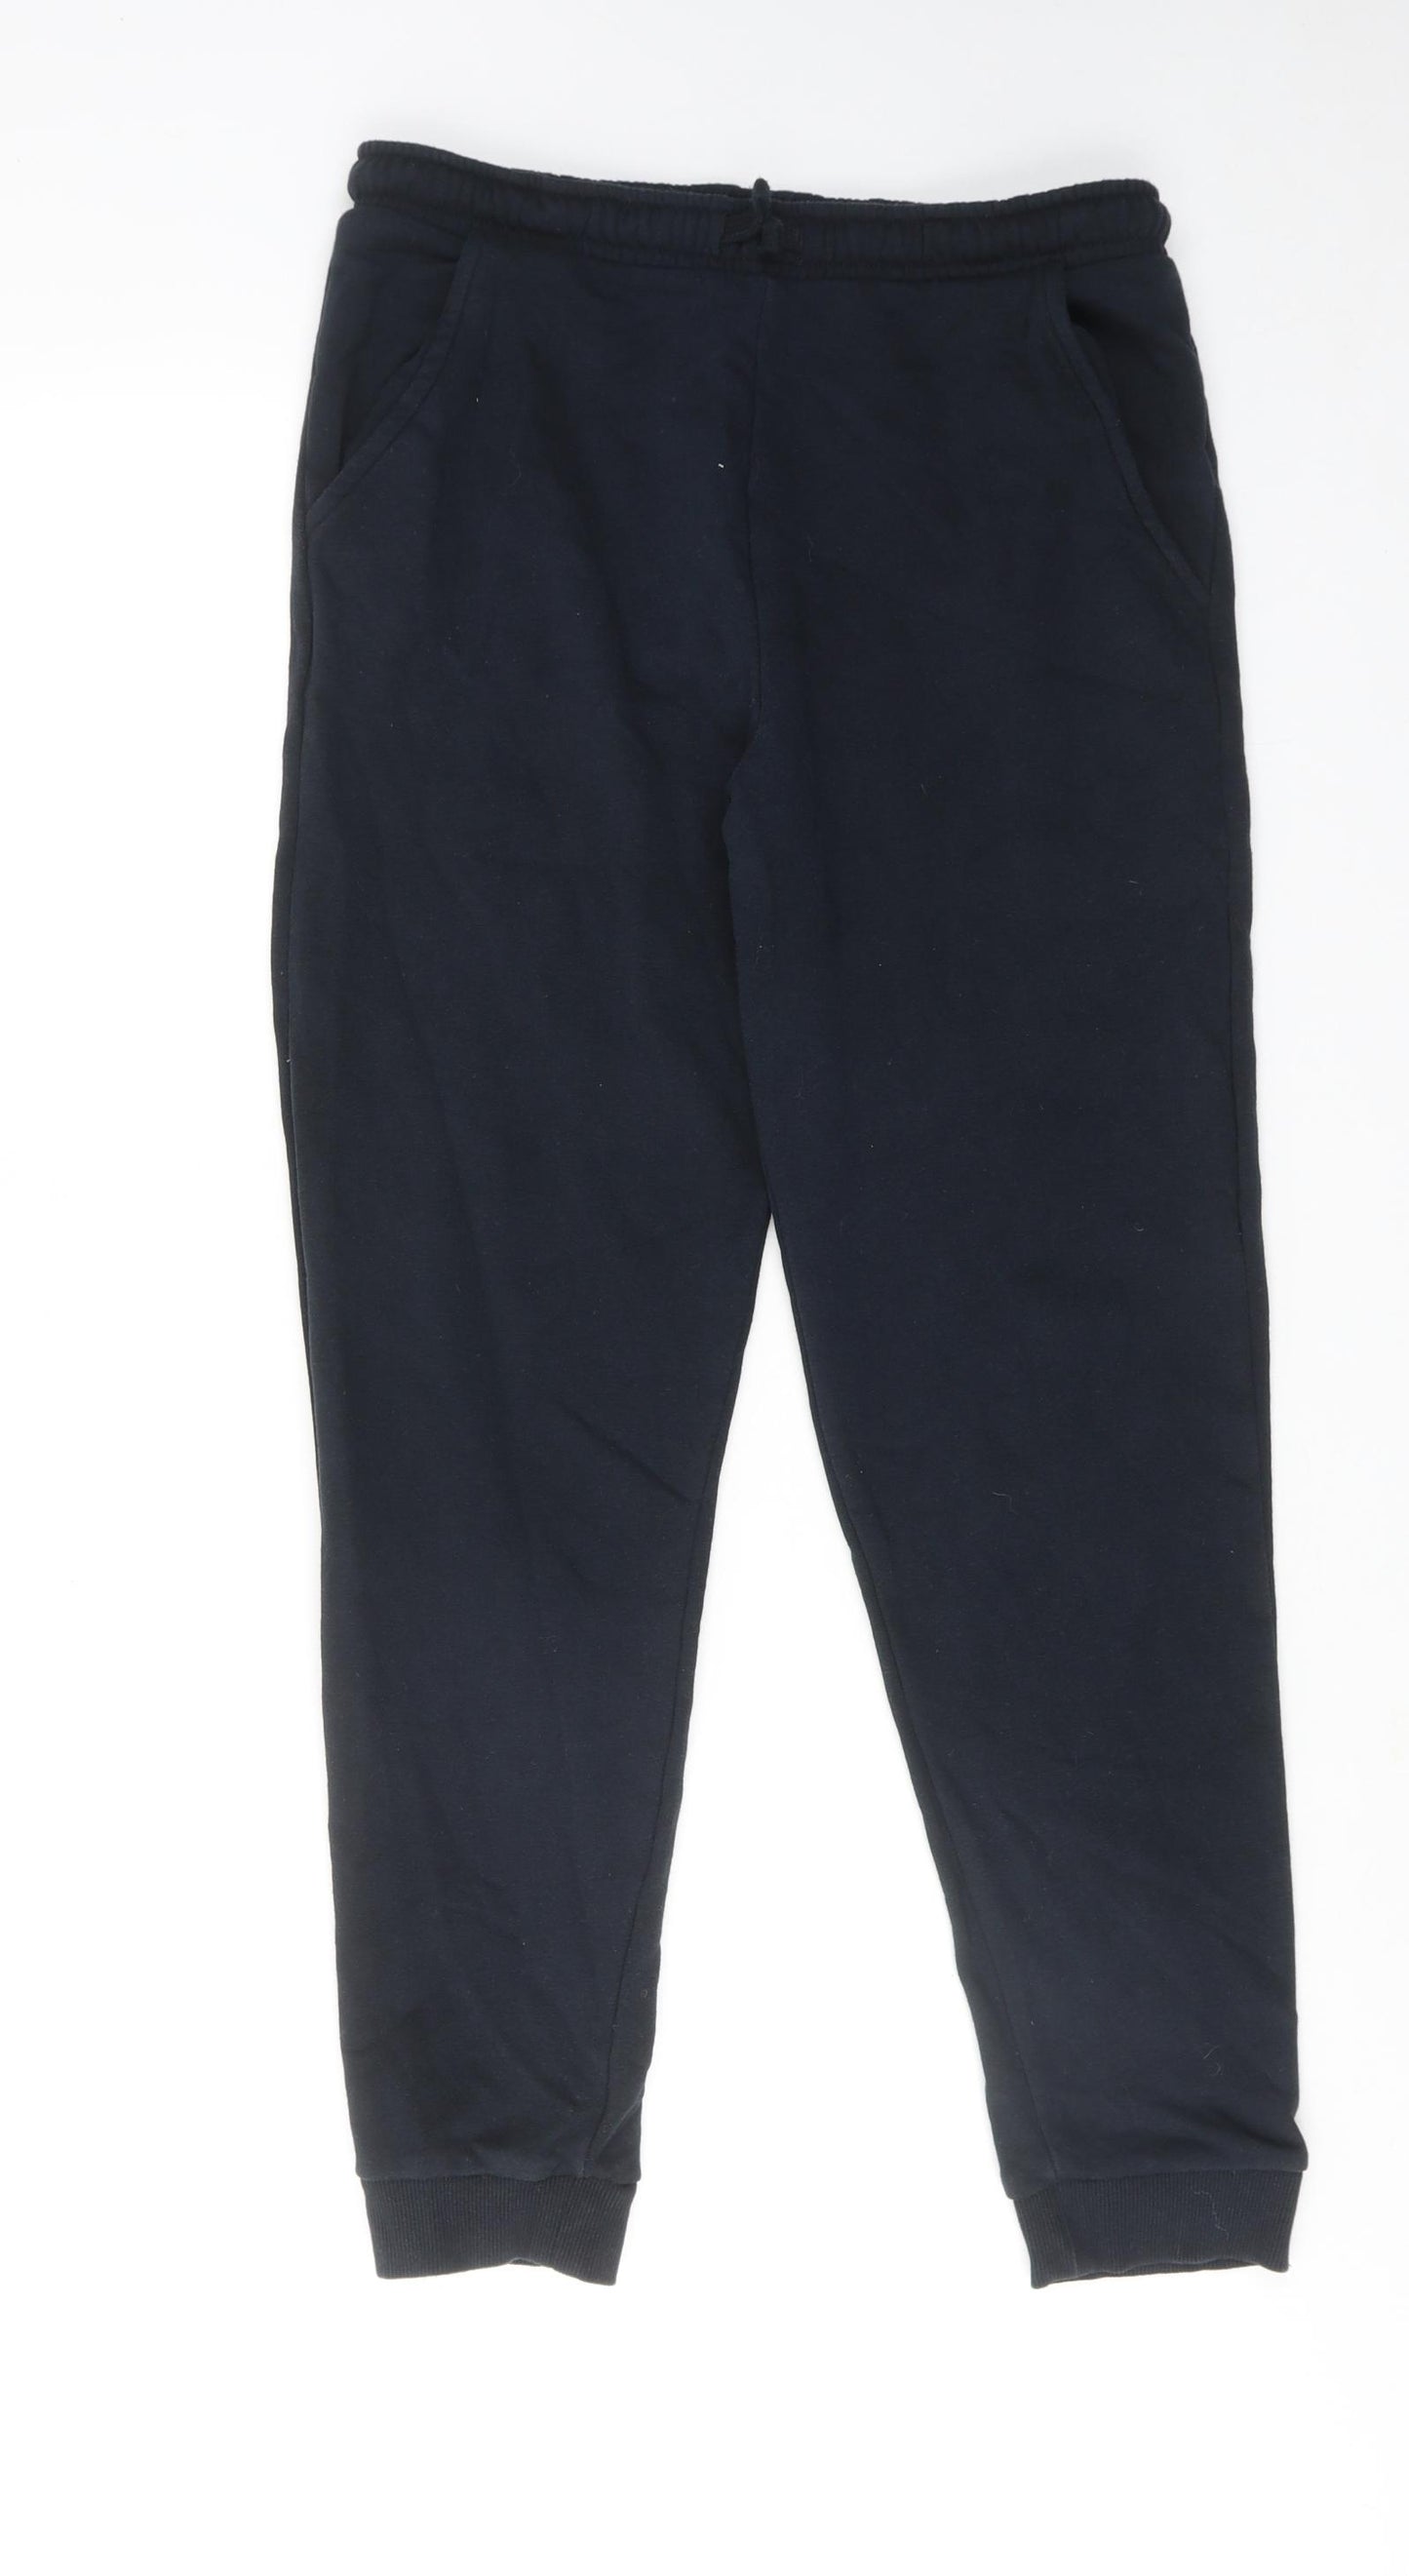 Marks and Spencer Boys Blue Cotton Jogger Trousers Size 13-14 Years Regular Drawstring